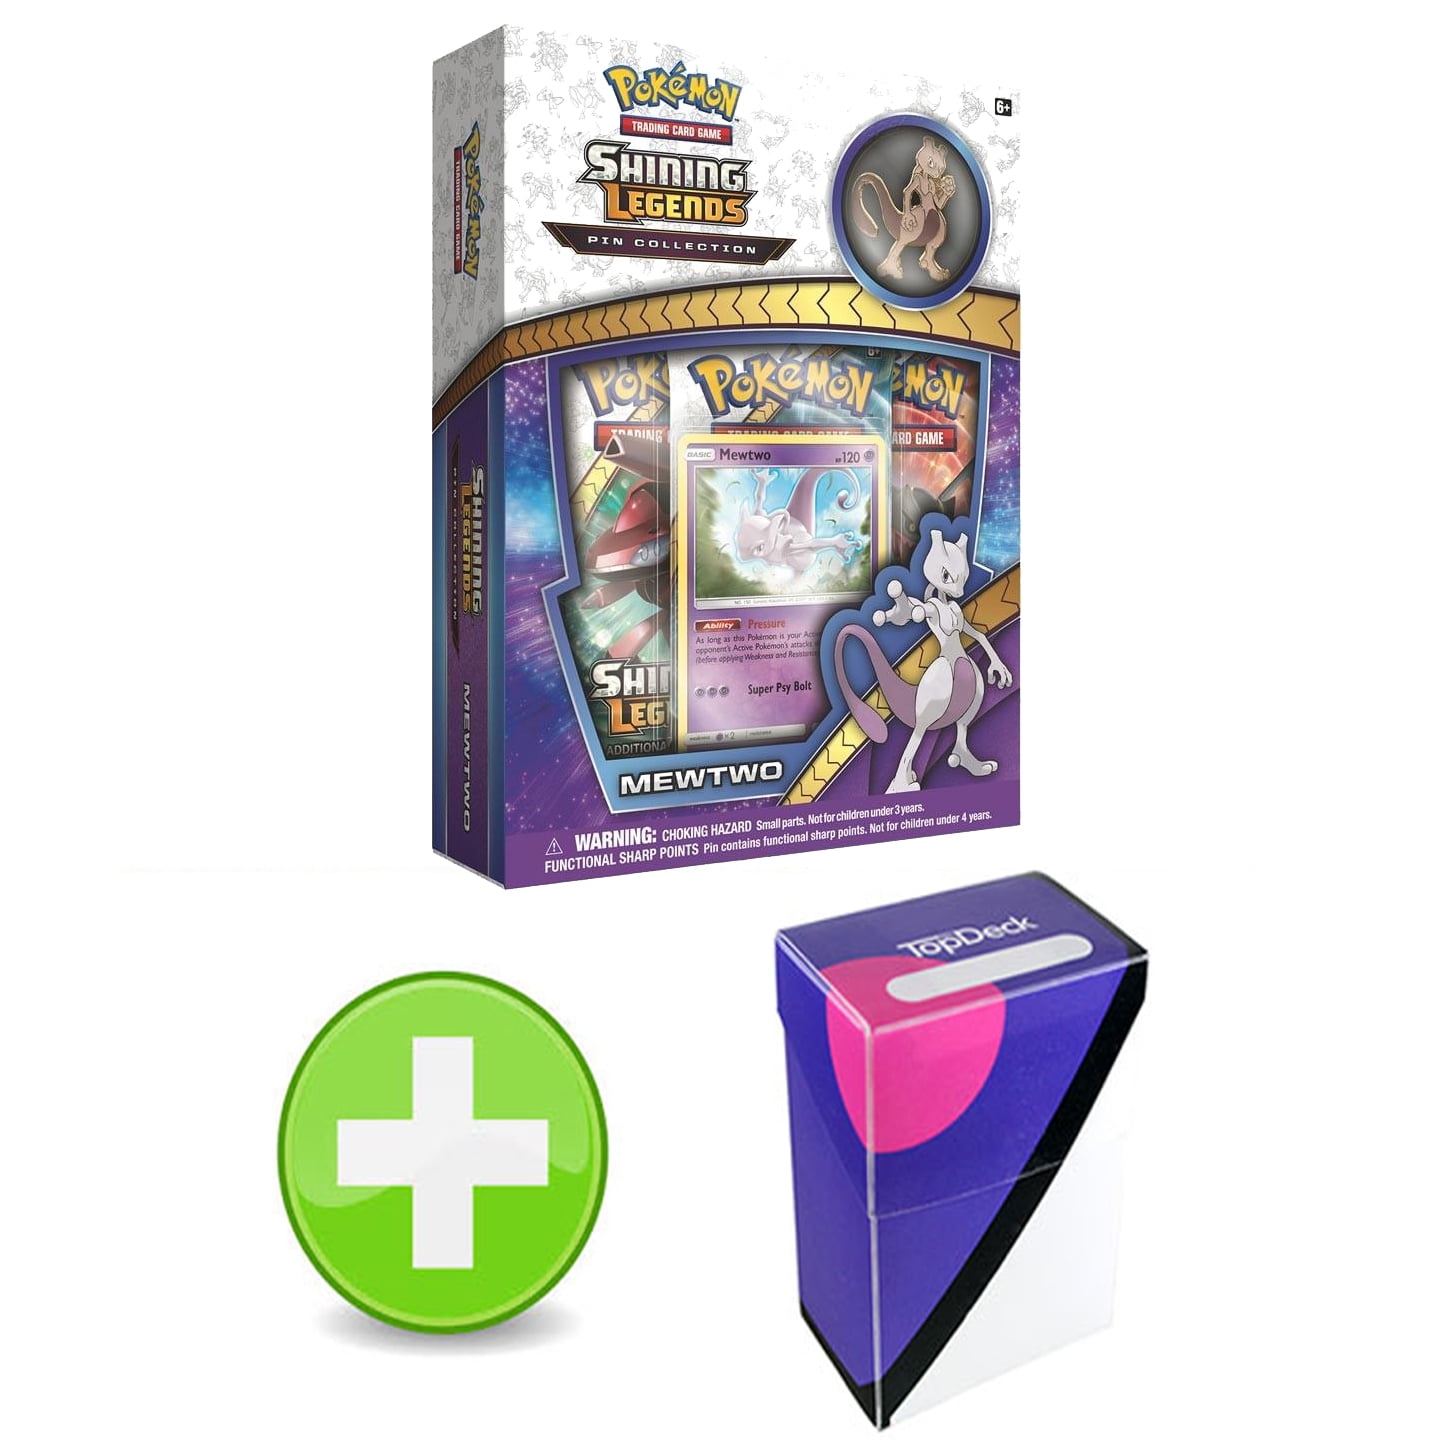 Pokemon Shining Legends Mewtwo Pin Collection Box 3 Booster Pack & Promo Card 